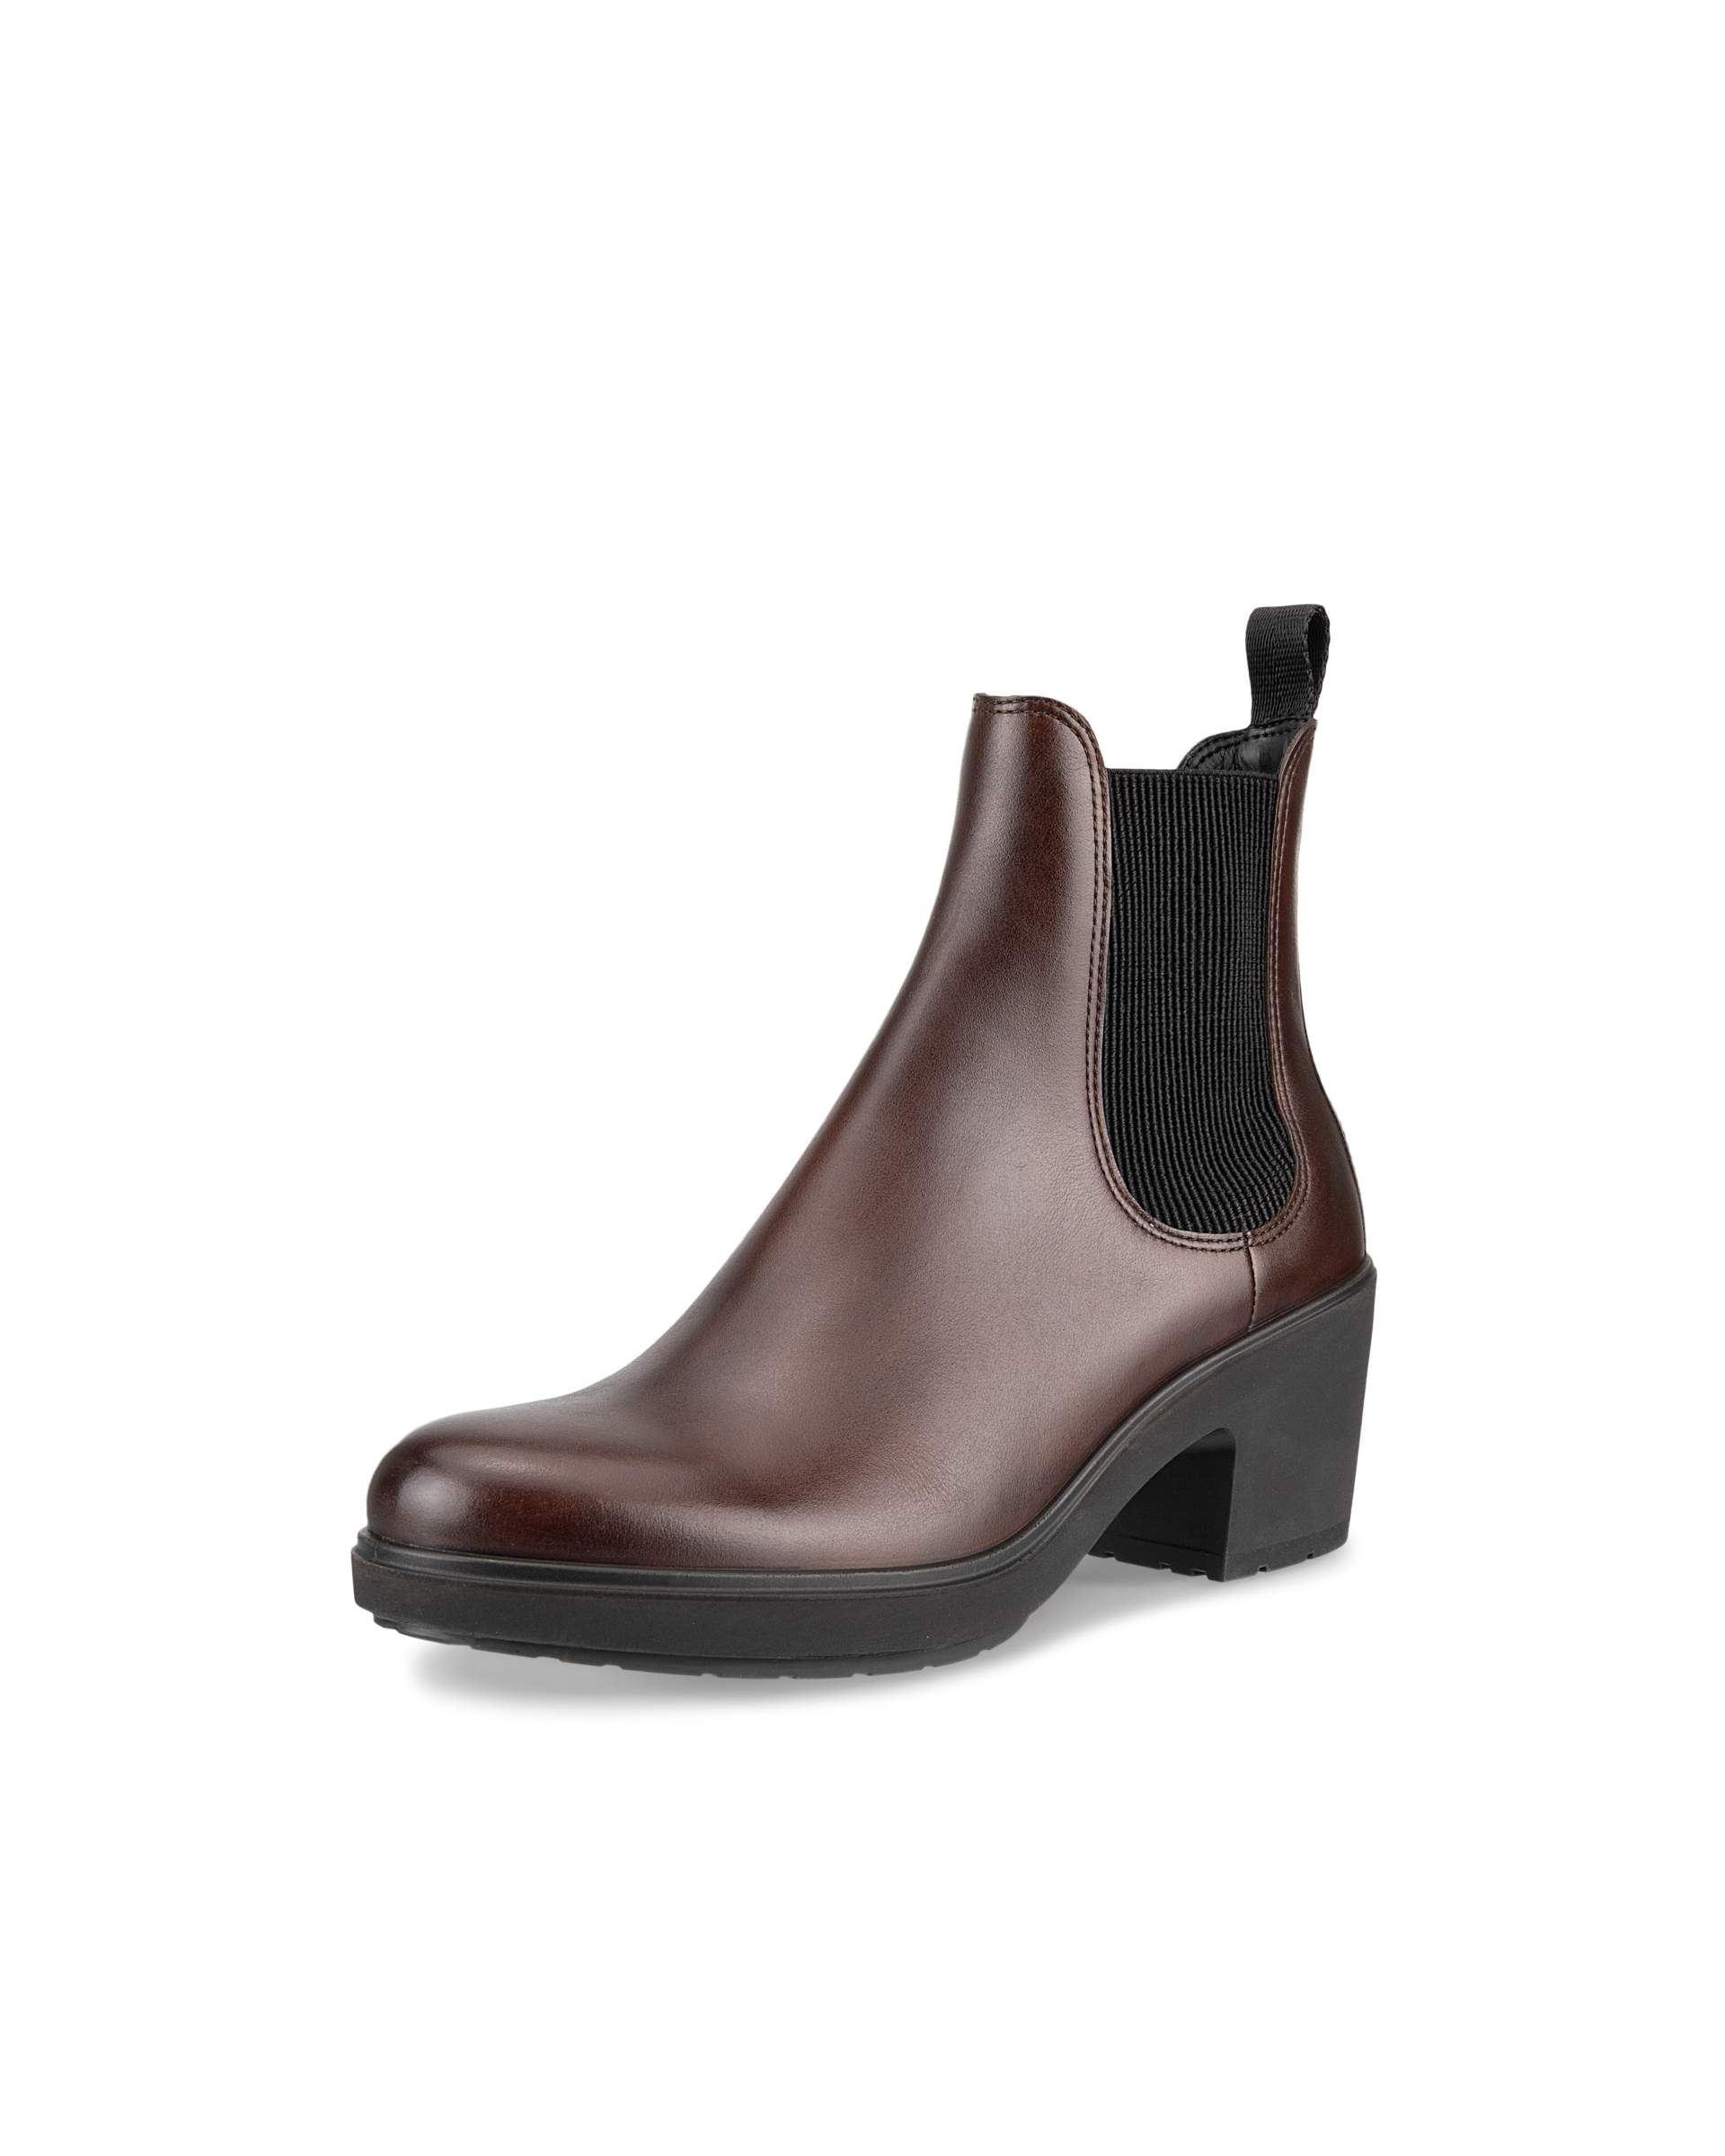 Shop for Women's Boots On Sale Now | ECCO®